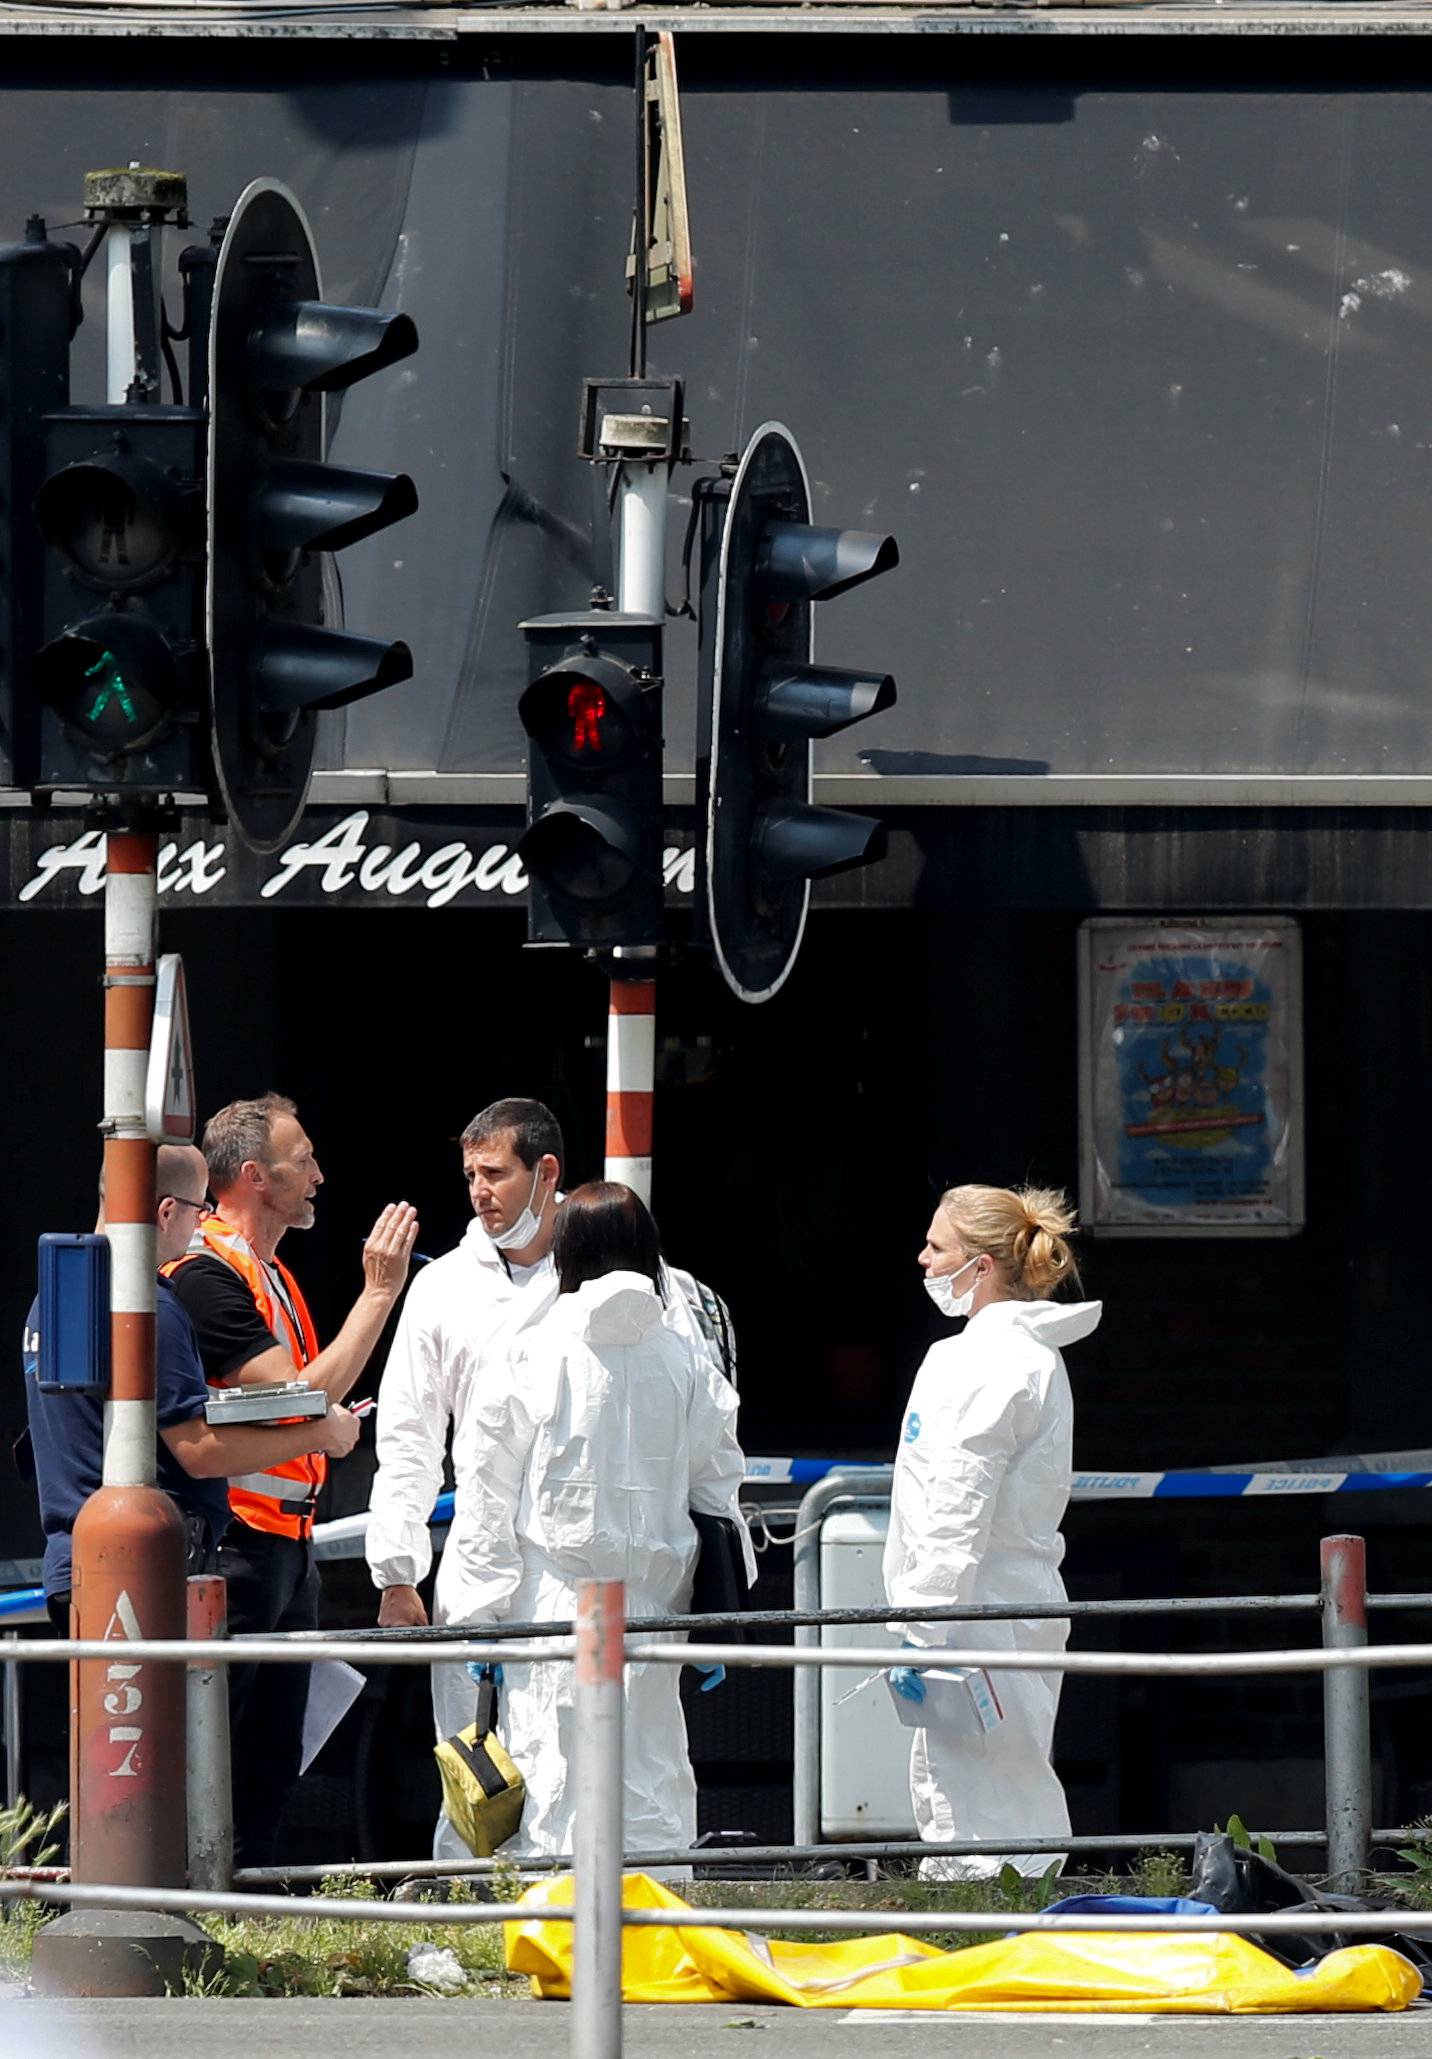 Forensics experts are seen on the scene of a shooting in Liege